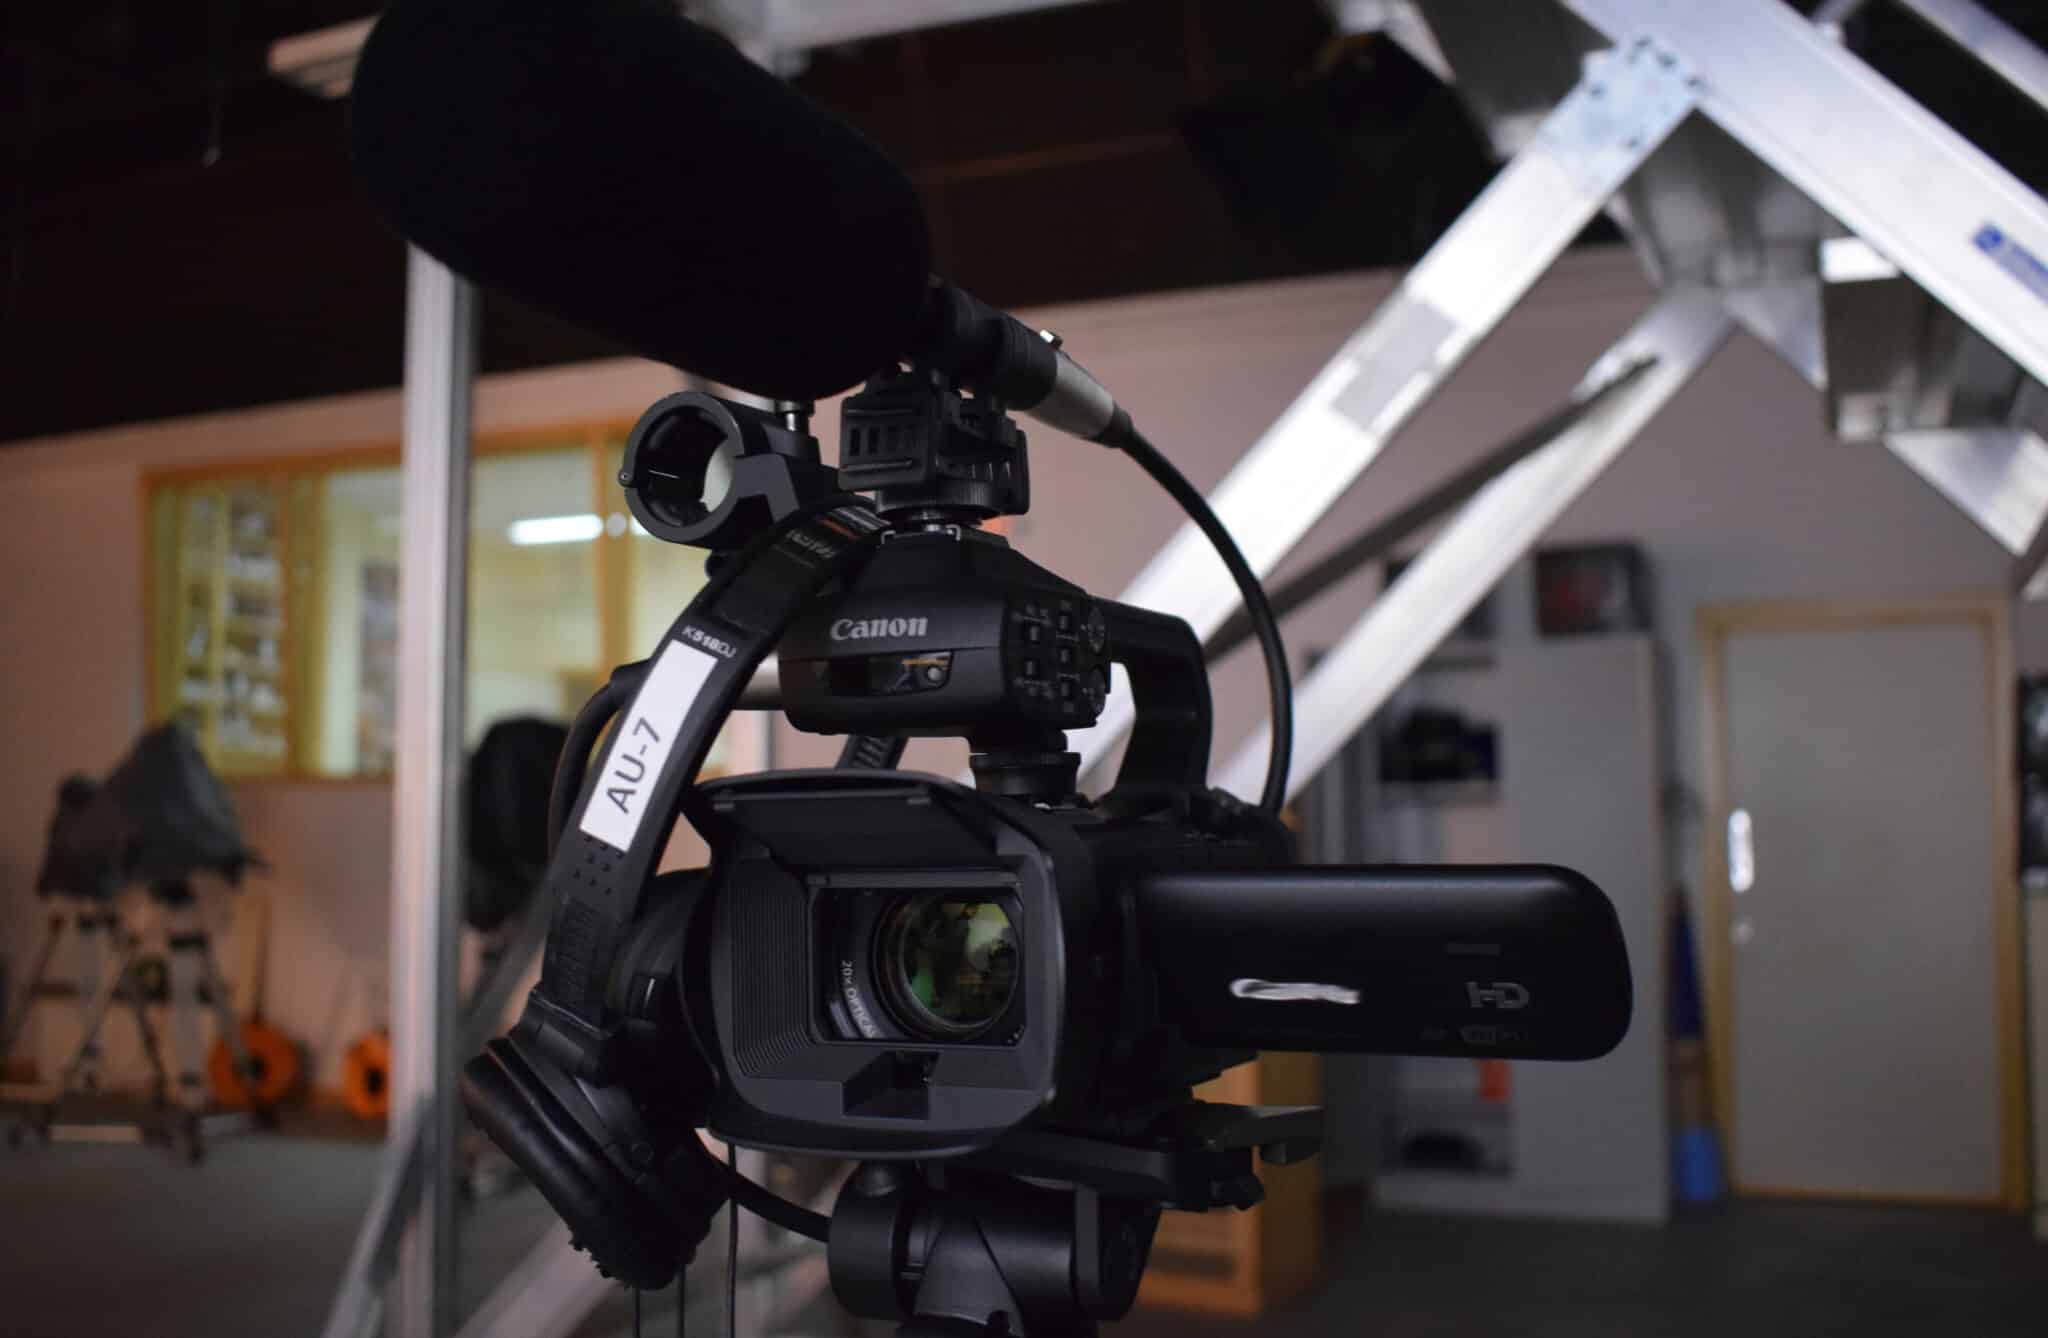 Video camera and microphone setup for creating content to be transcribed by transcription services.